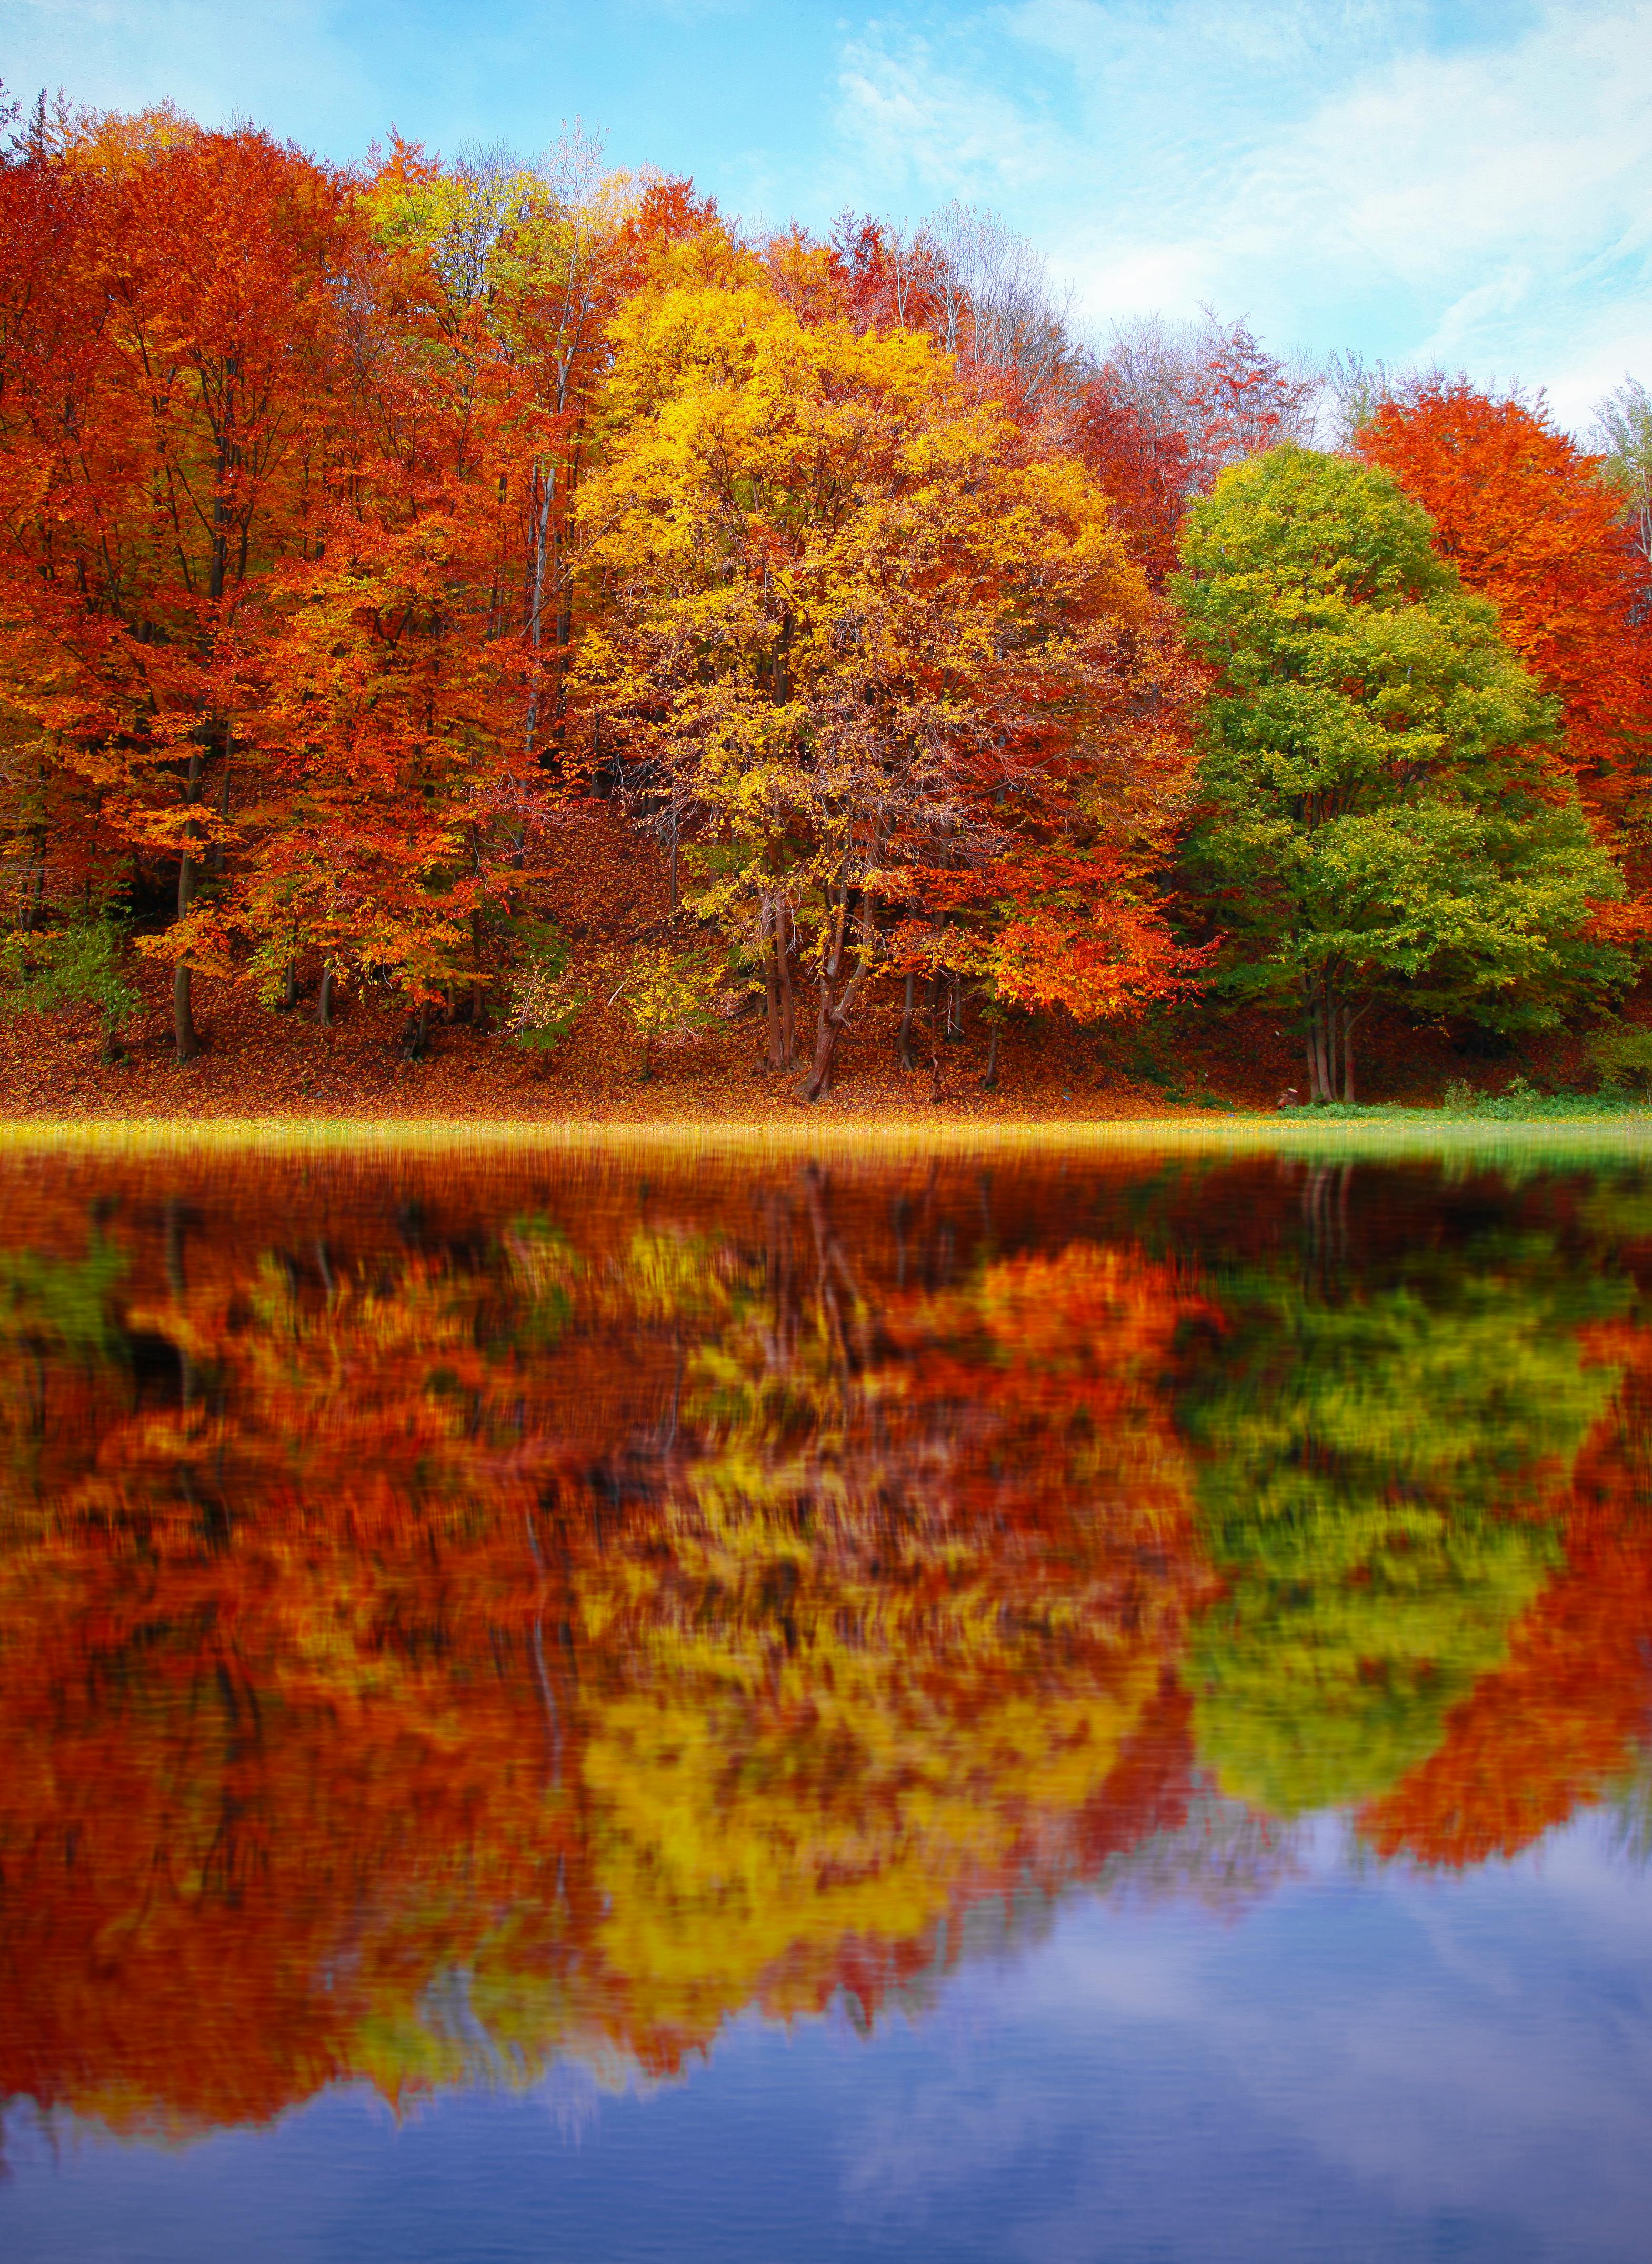 Fall Background Images, HD Pictures and Wallpaper For Free